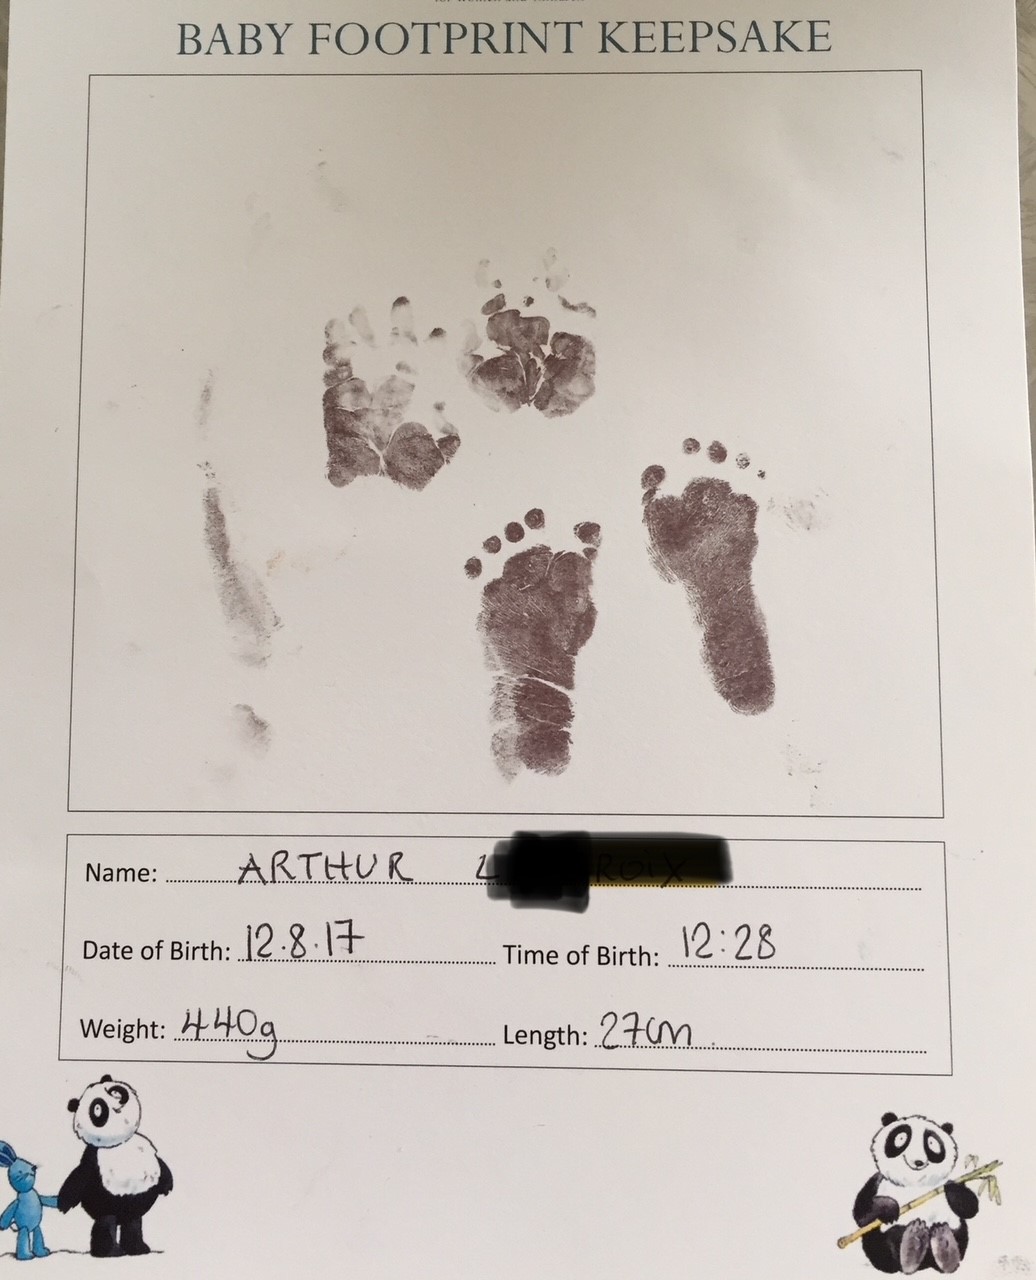 Arthur's hand and footprints on a certificate